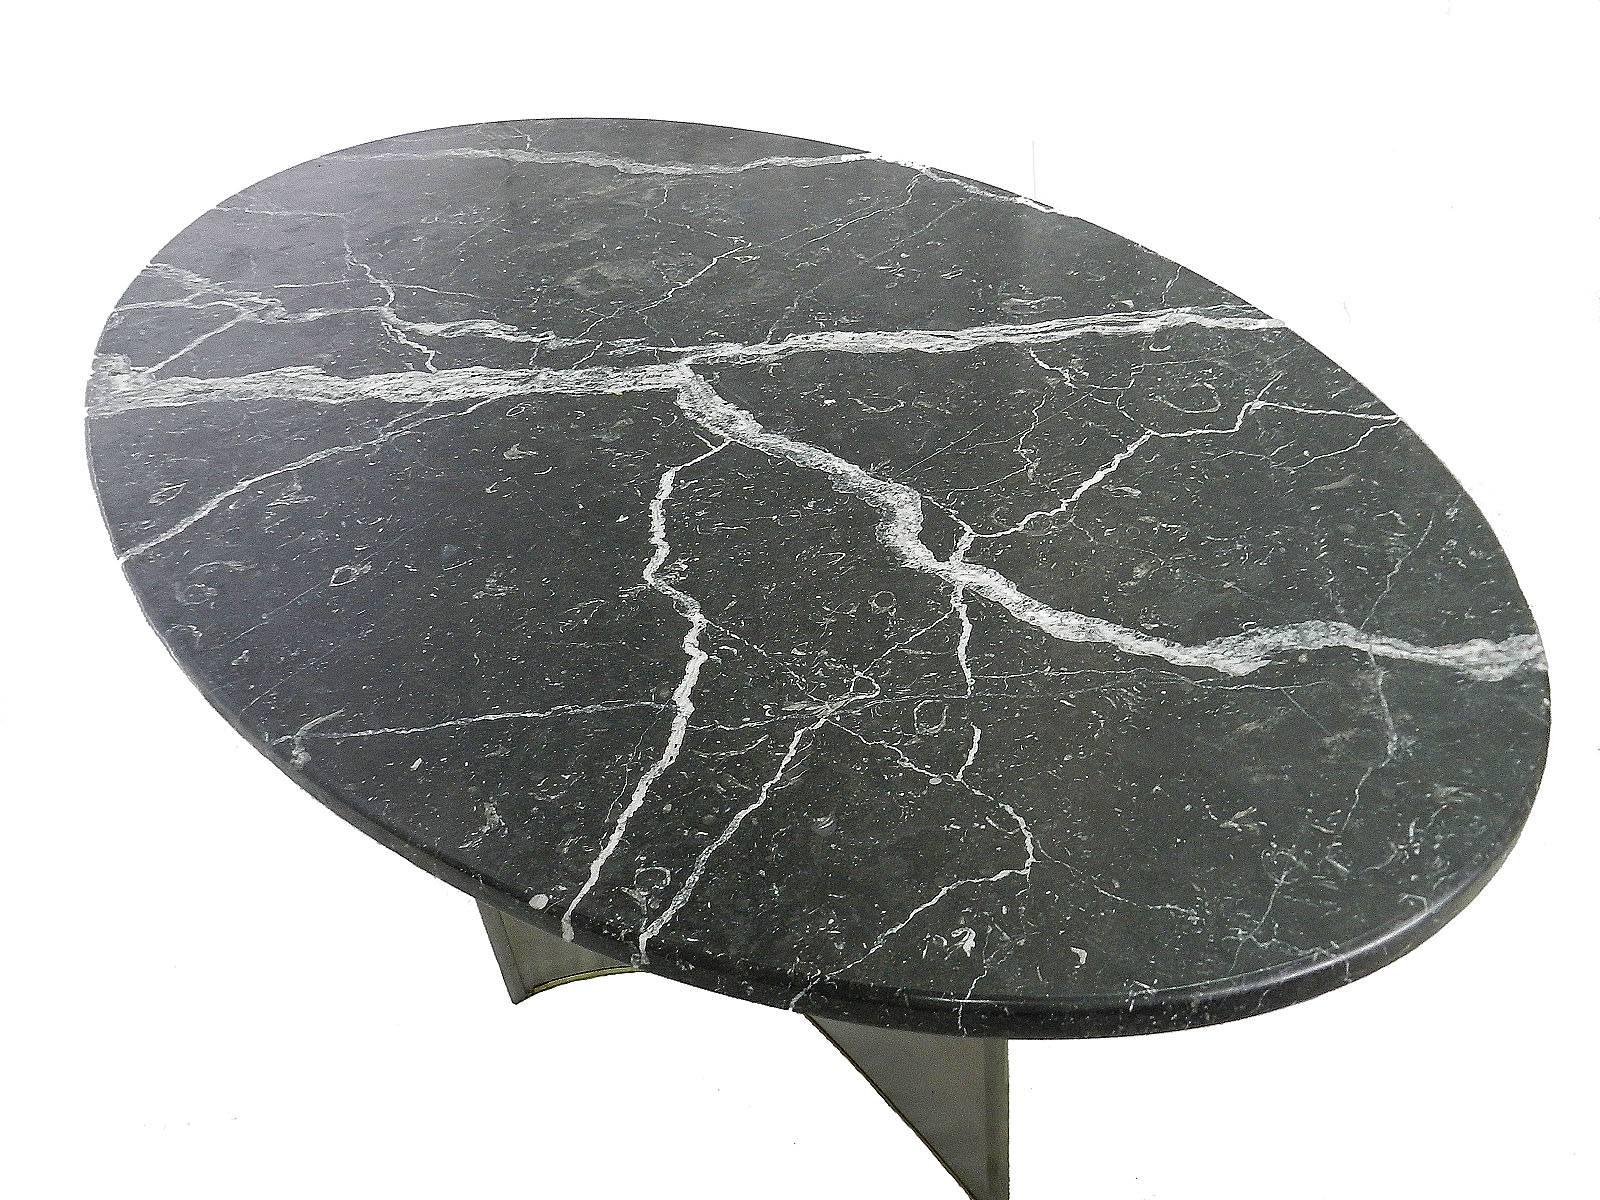 Midcentury dining table marble metal base, circa 1970 in the manner of Maison Jansen.
In our opinion this stunning table is probably by Maison Jansen
Very unusual being an oval table very like their smaller circular ones of the same design
Good